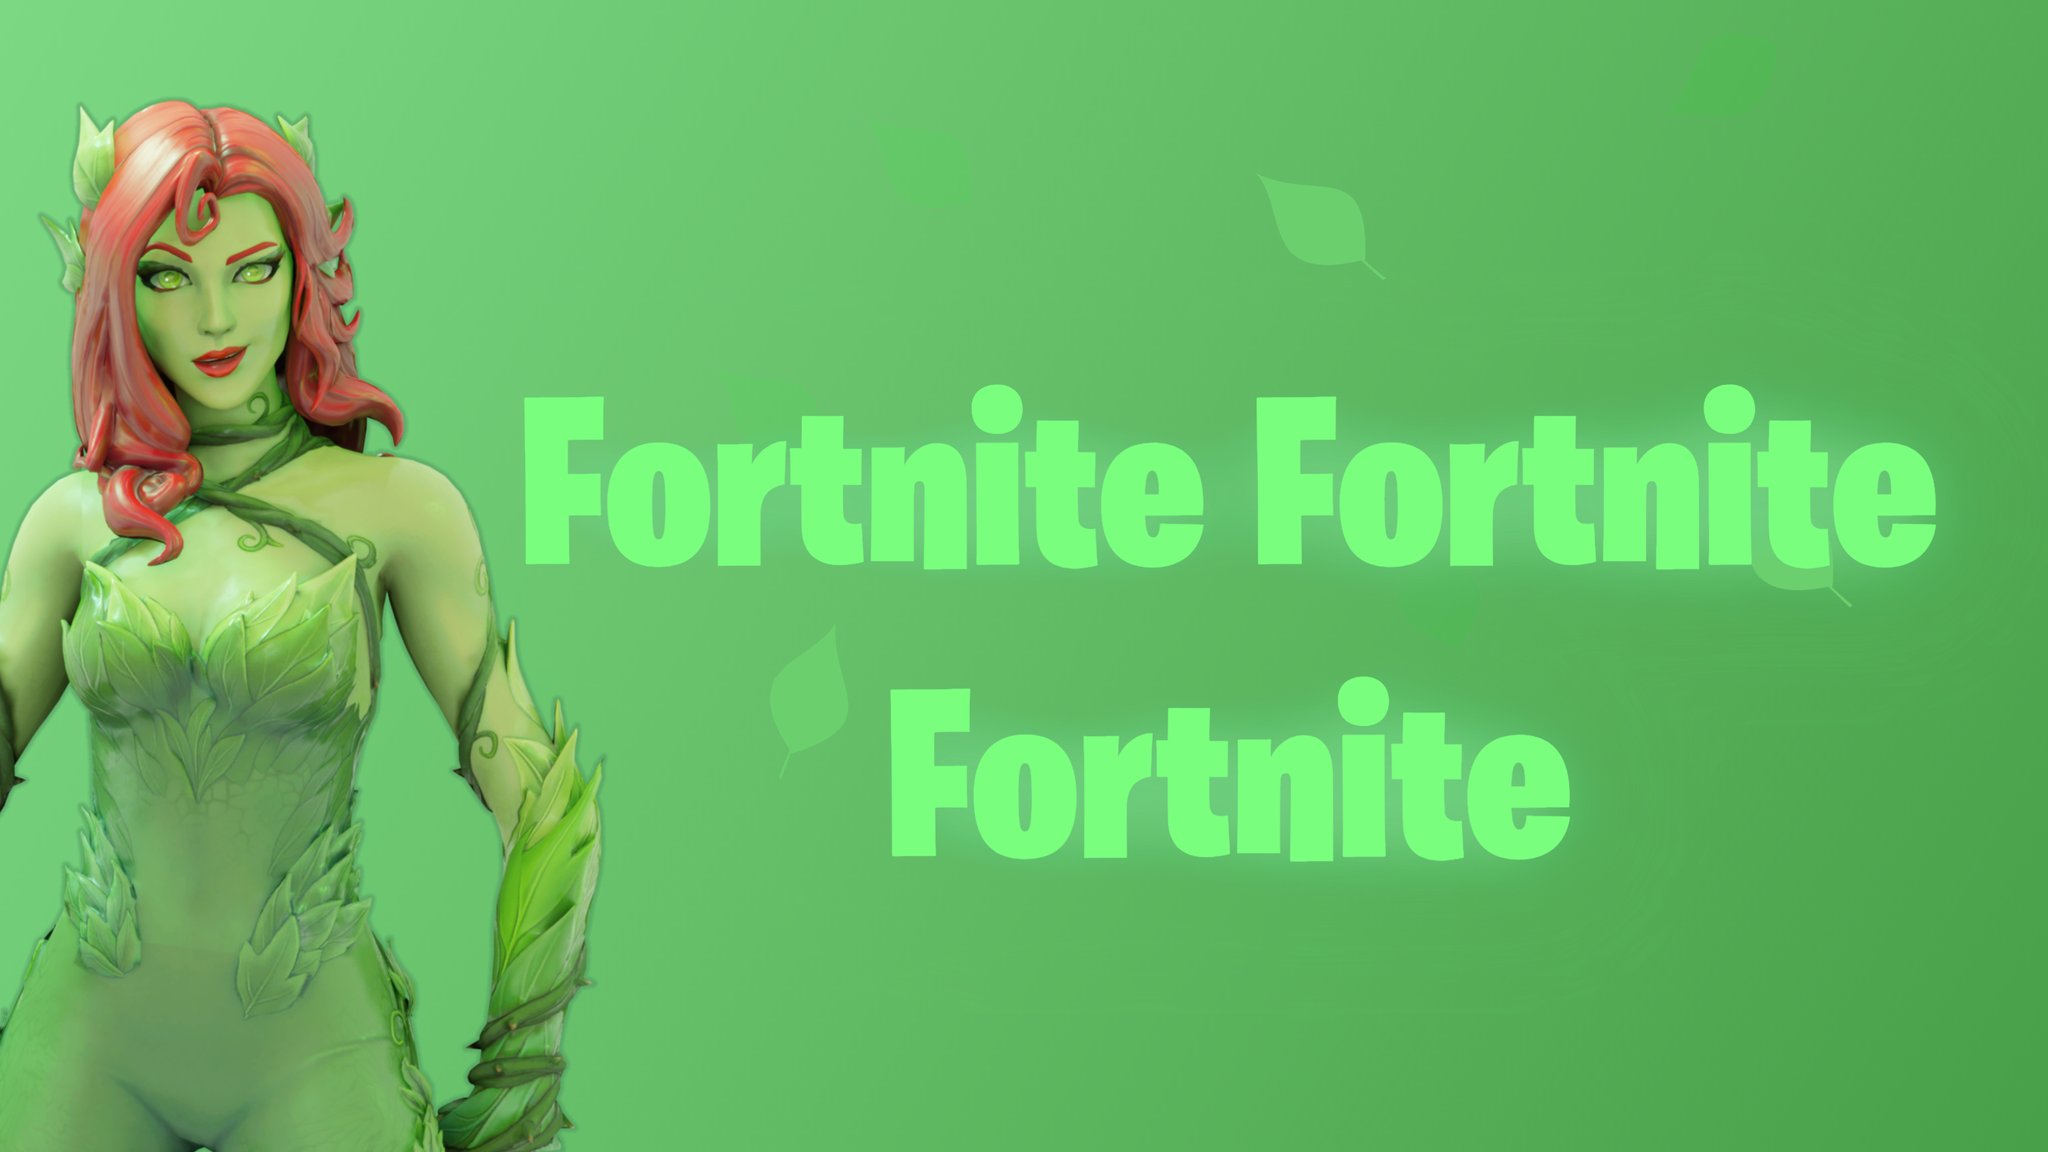 Poison Ivy Fortnite Wallpapers